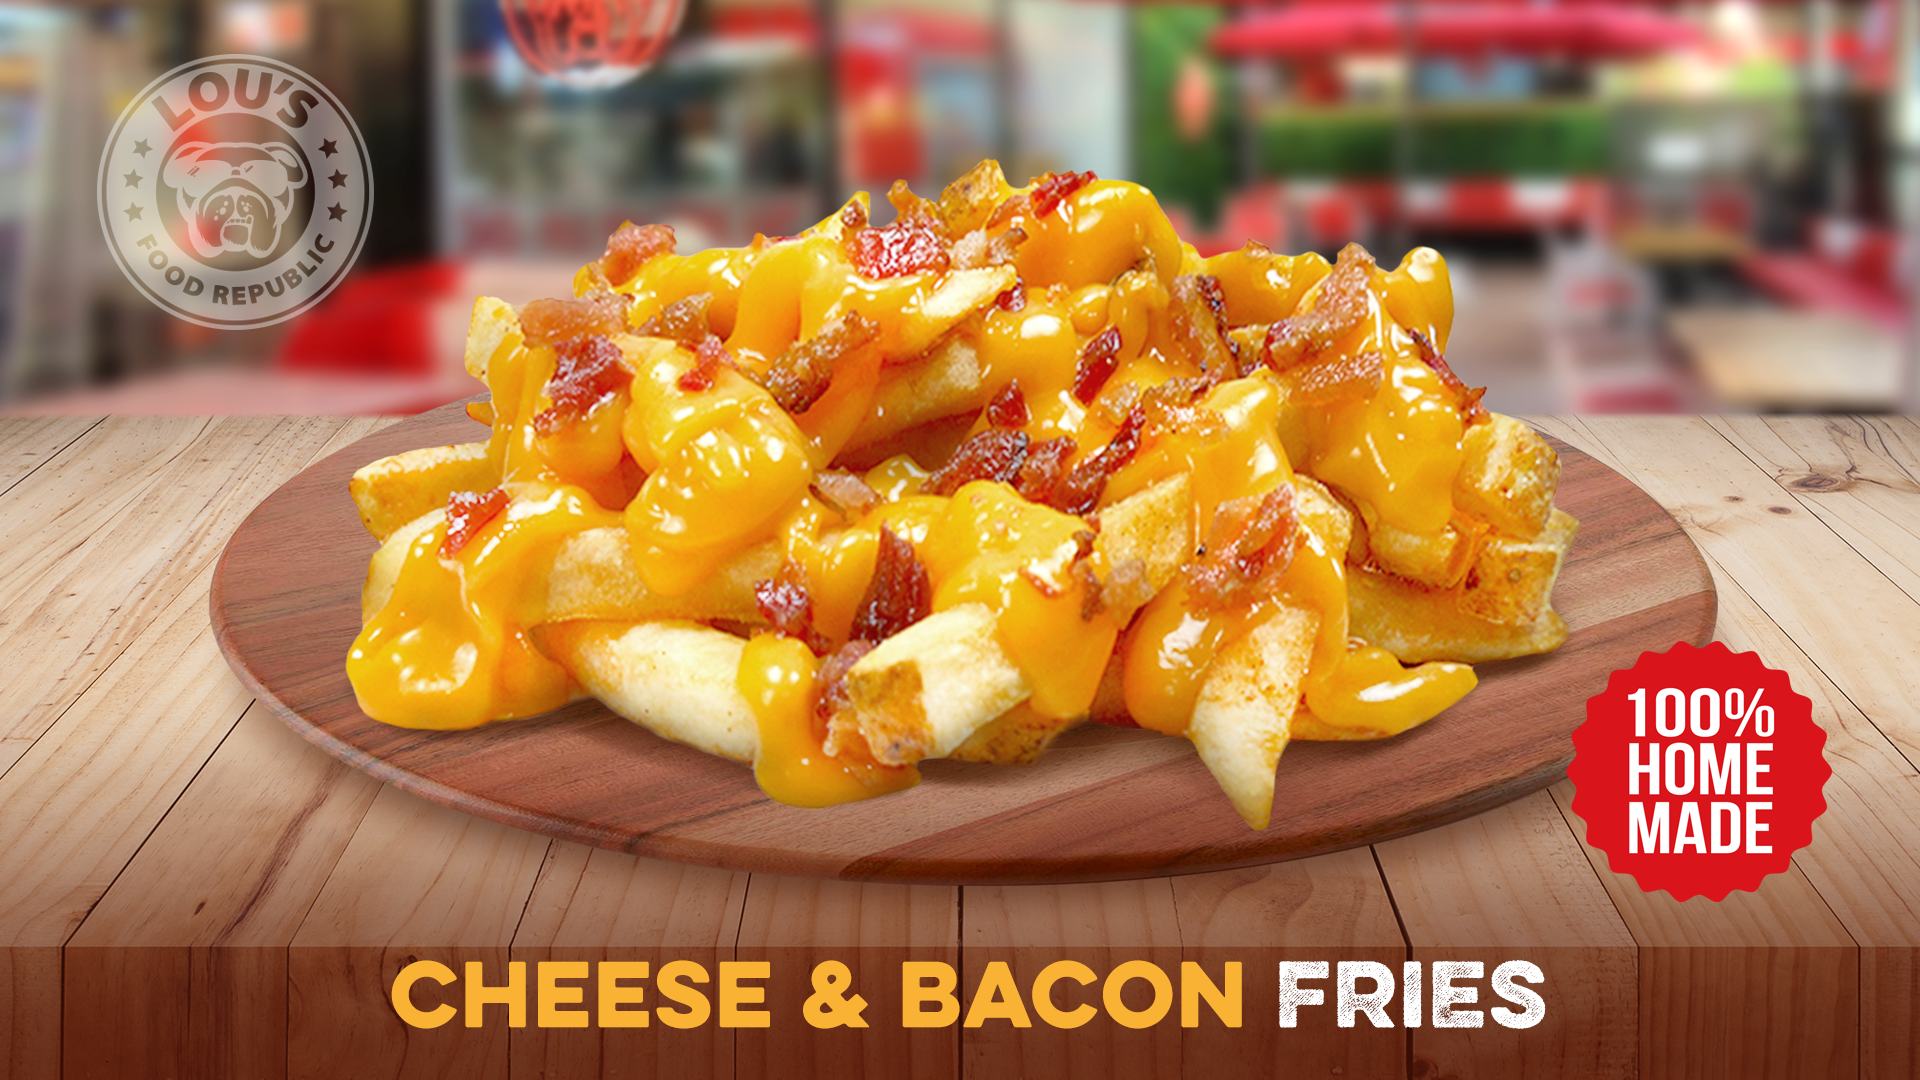 CHEESE & BACON FRIES